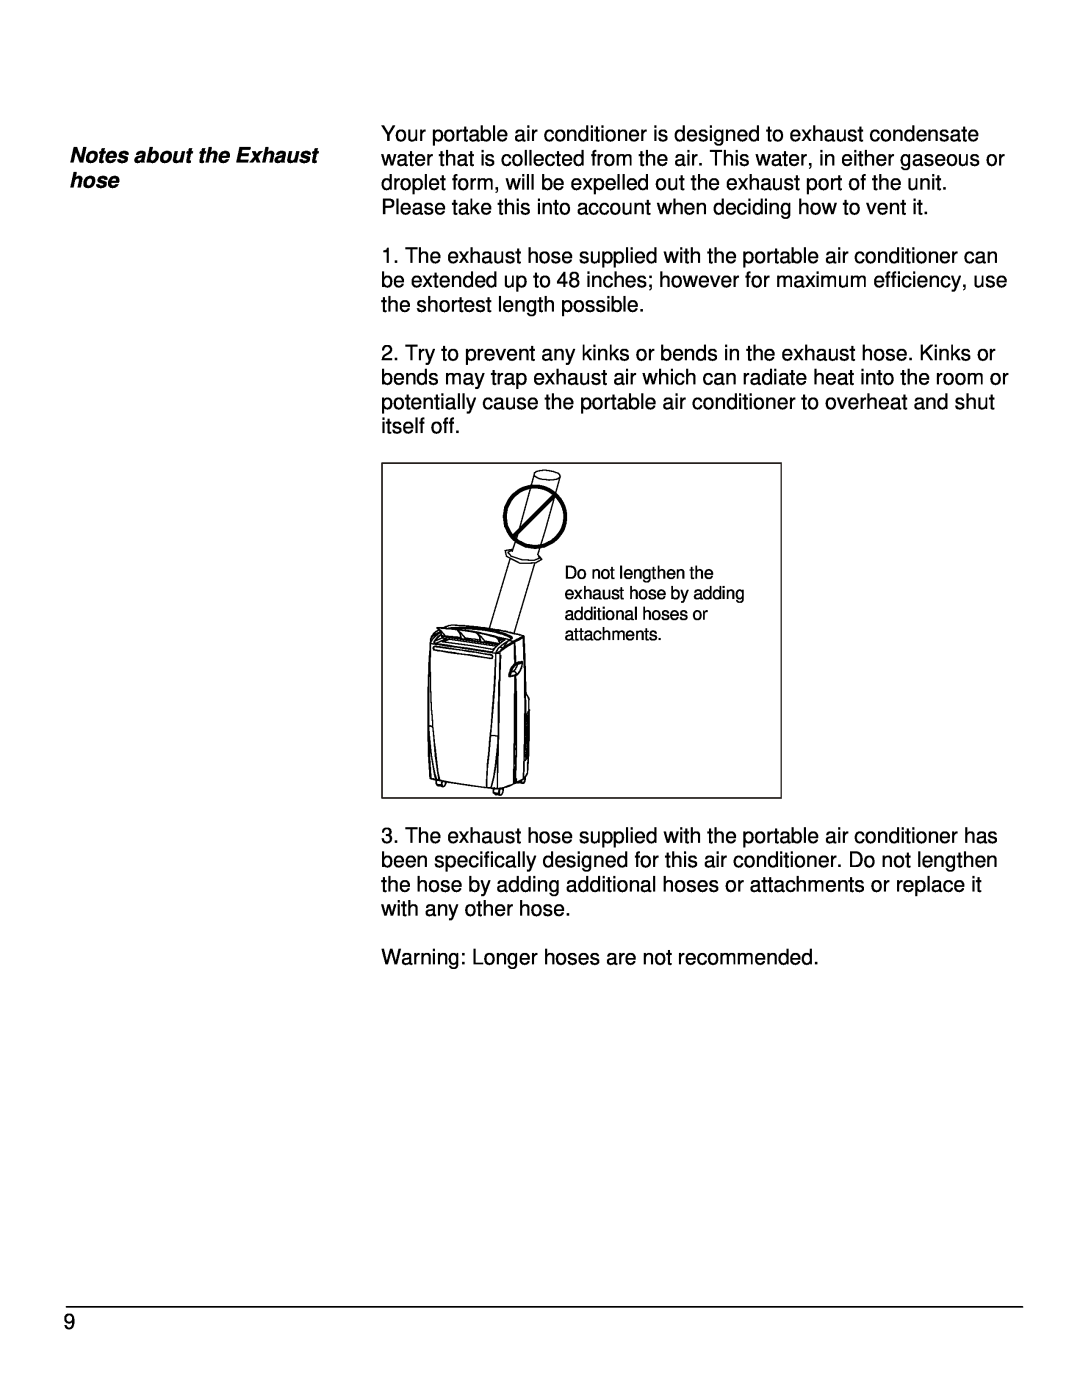 EdgeStar AP14000W owner manual Notes about the Exhaust hose 